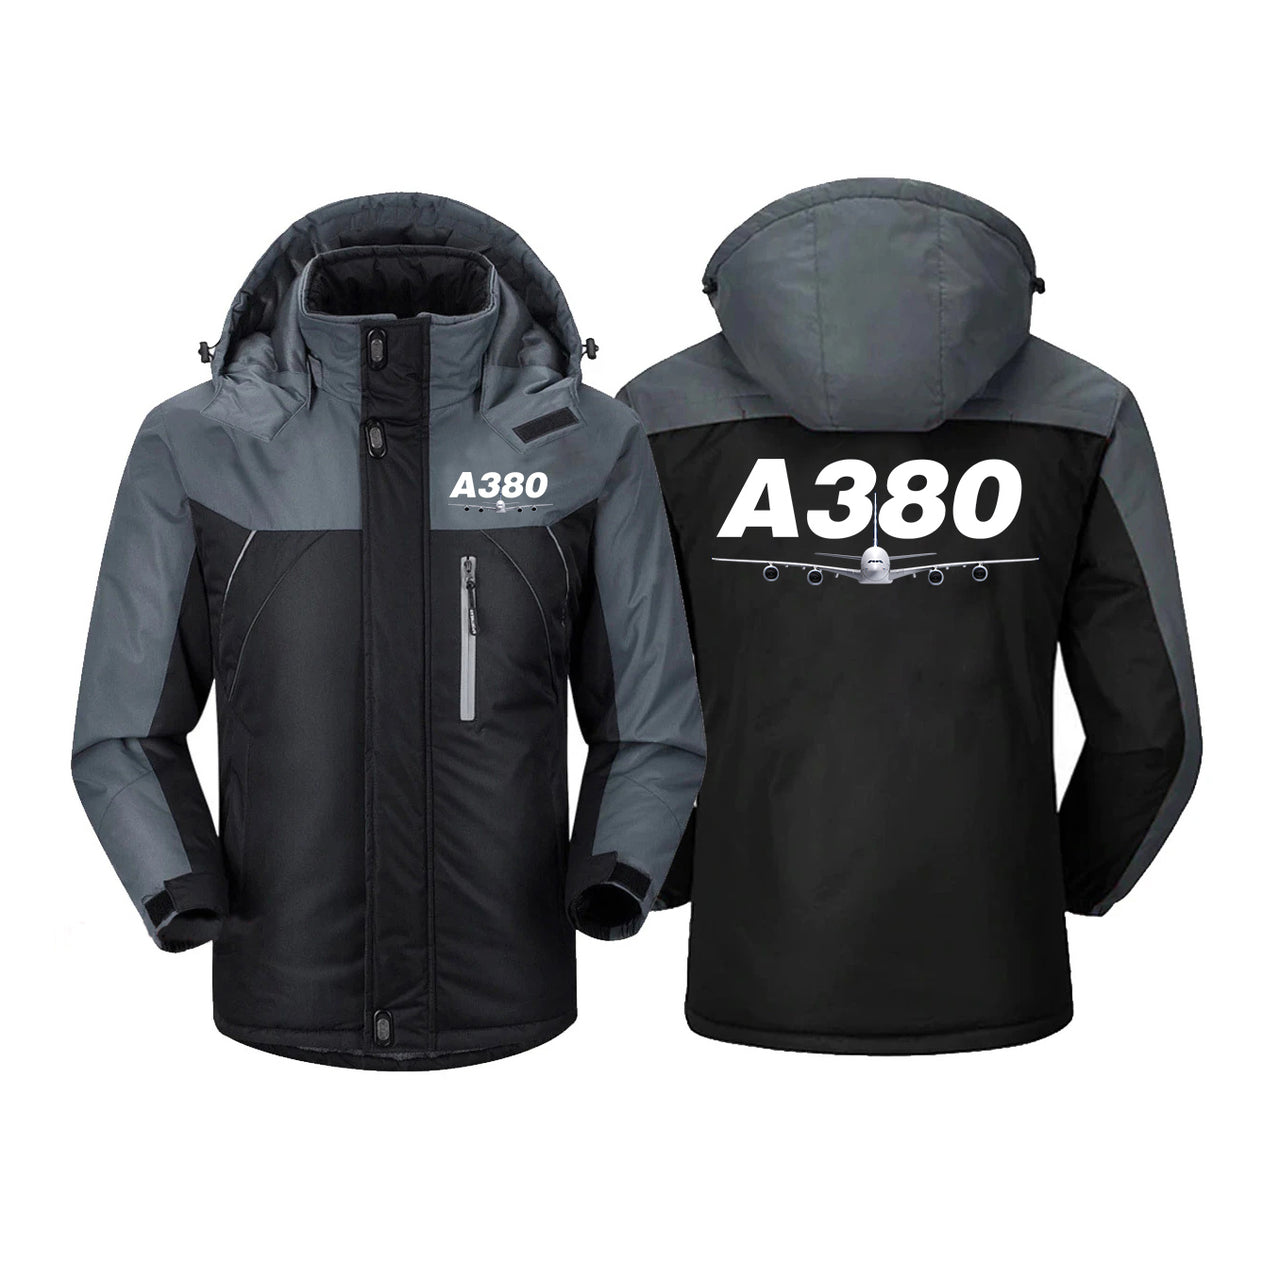 Super Airbus A380 Designed Thick Winter Jackets